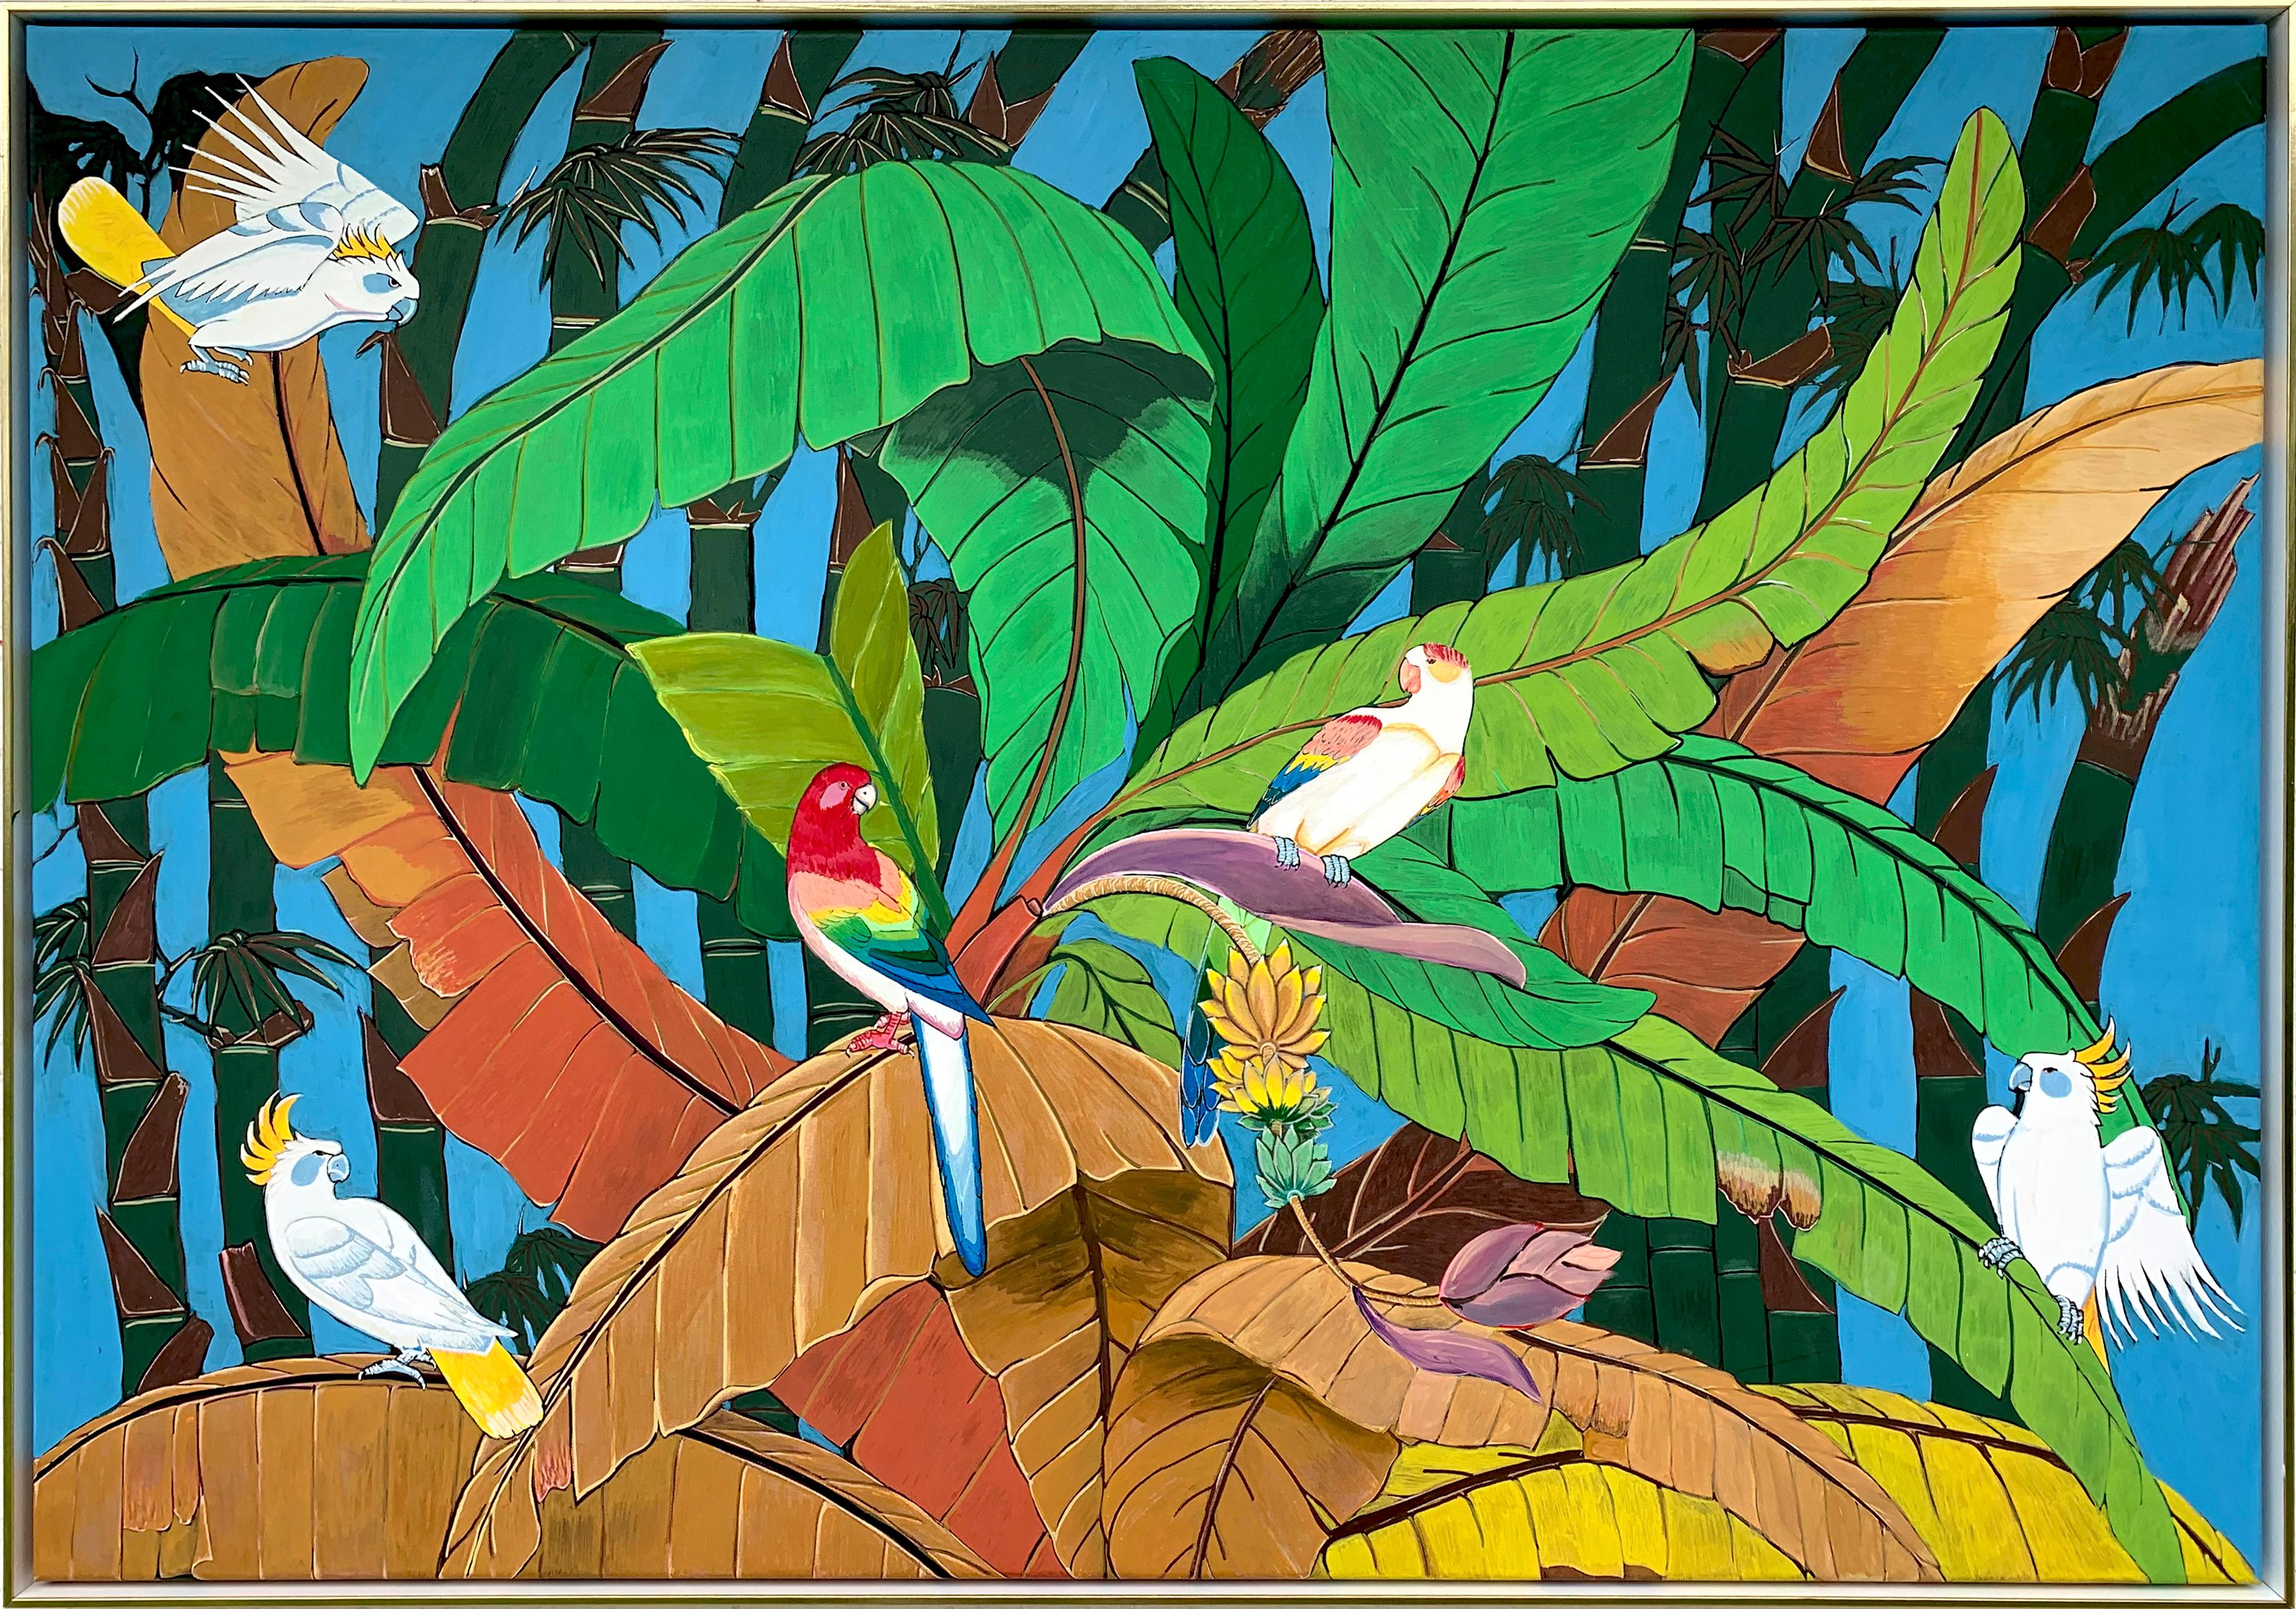 Love against all odds is a beautiful painting of 80 x 115 cm full of vibrant colors. 
Different birds with orange and yellow are sitting on jungle trees, looking at each other, while 3 other birds are flying around them looking at the pair in the